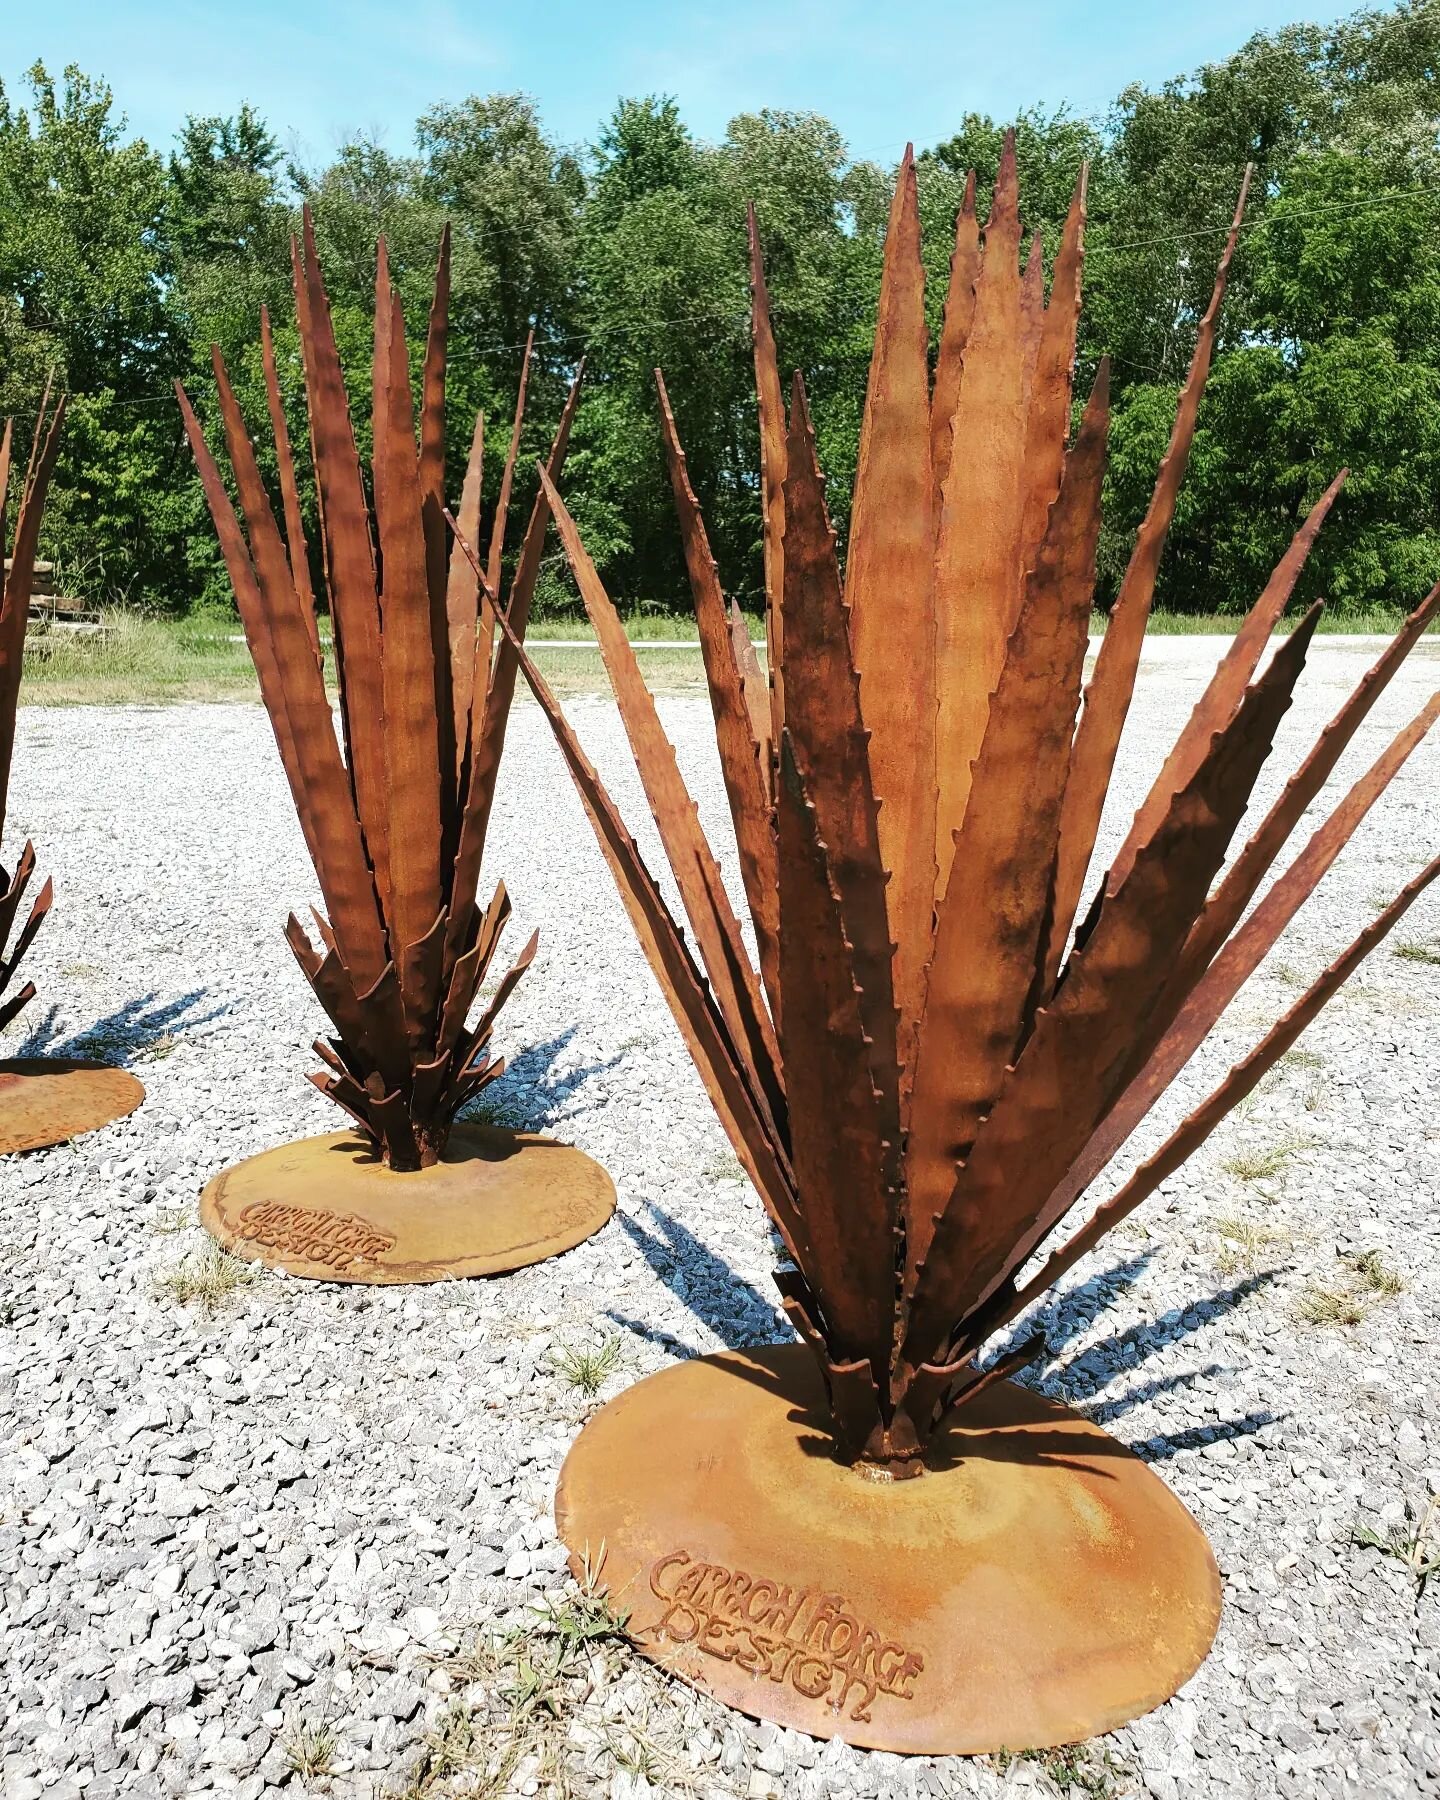 Finished some agave sculptures - these will be available at Cedarhurst Art and Craft fair Sept 9-11 Hand made from corten steel, they will last a lifetime. 

#sculpture #agave #mezcal #tequila #metalwork #metal #fabrication #blacksmith #corten #steel